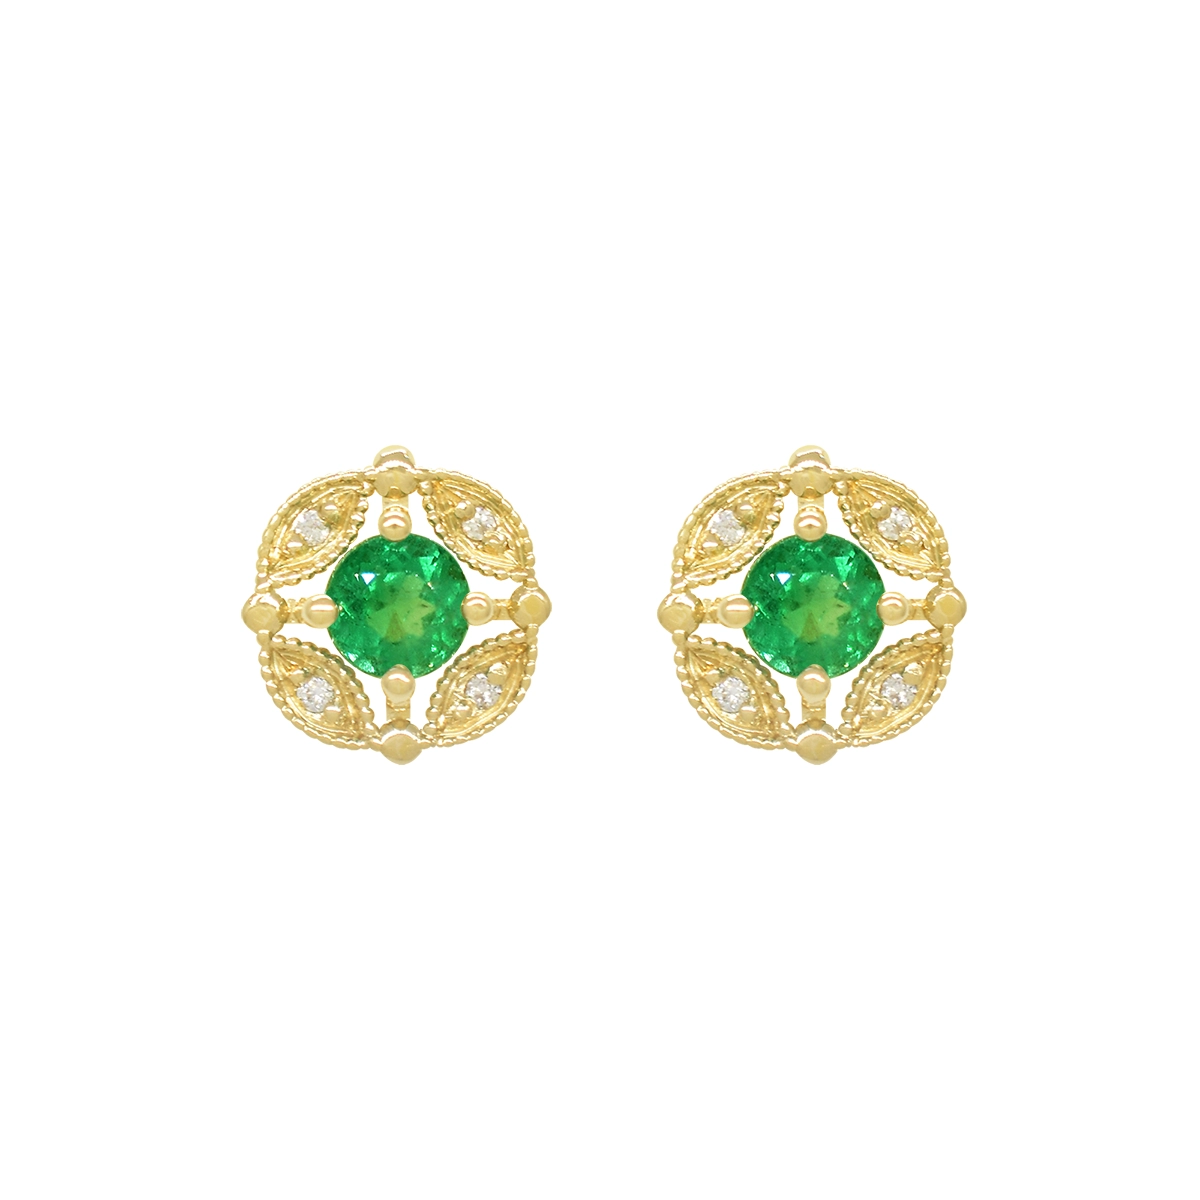 18K gold emerald and diamond stud earrings with 0.50 carats total weight in 2 round cut real natural emeralds and 0.04 carats total weight in 8 round cut genuine diamonds